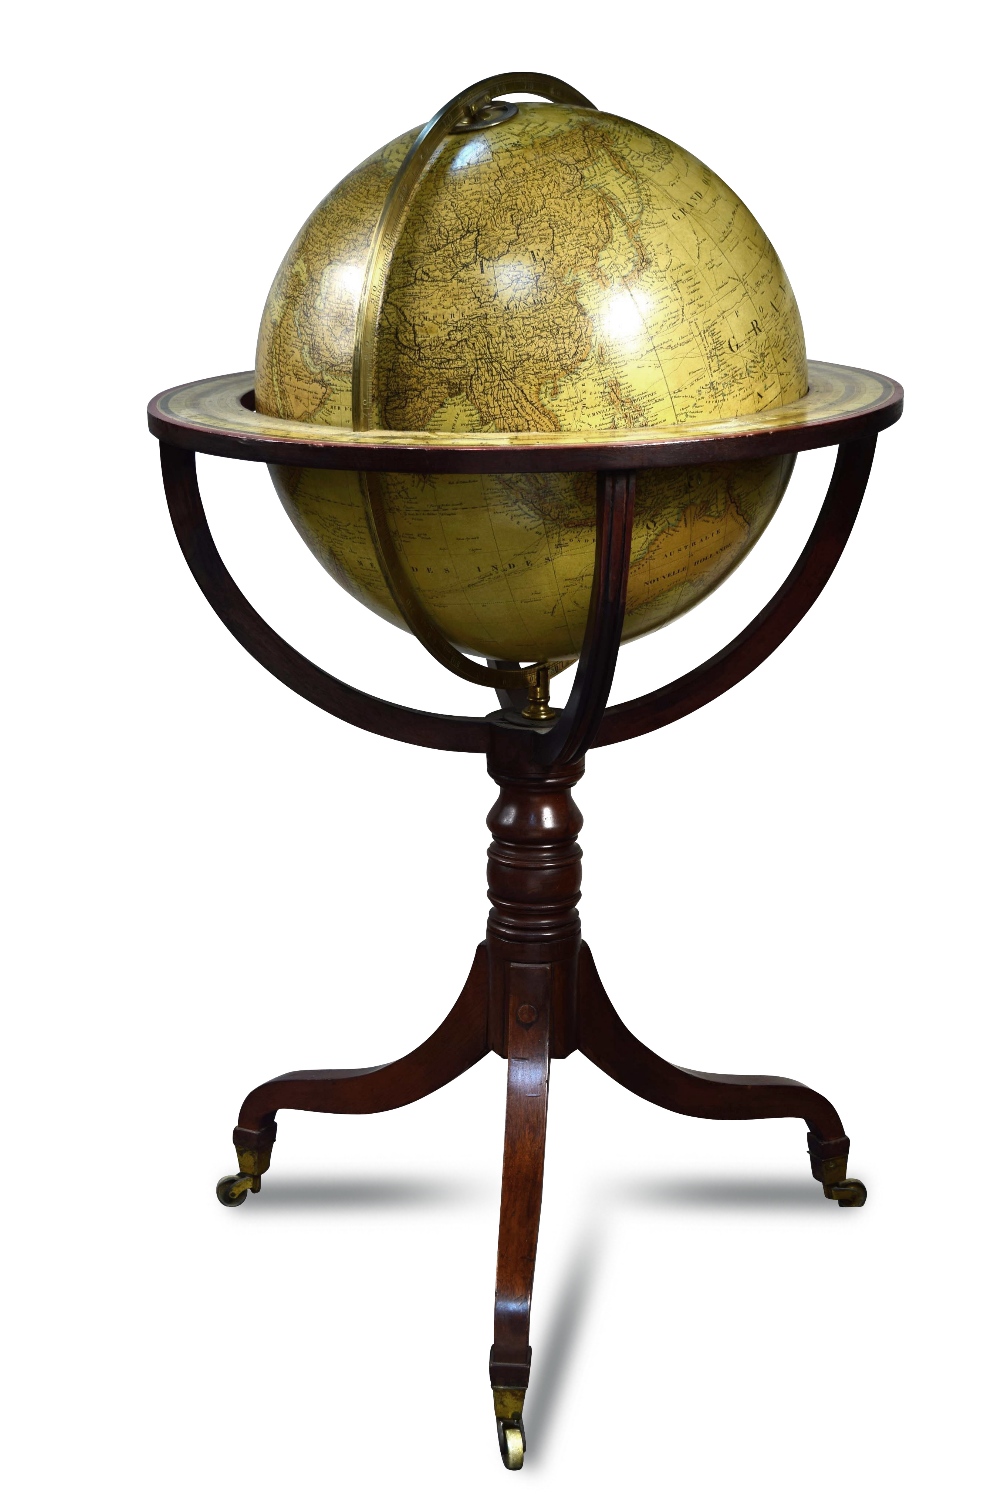 A Bastien terrestrial library globe, modern, on a Regency style mahogany stand with brass casters,